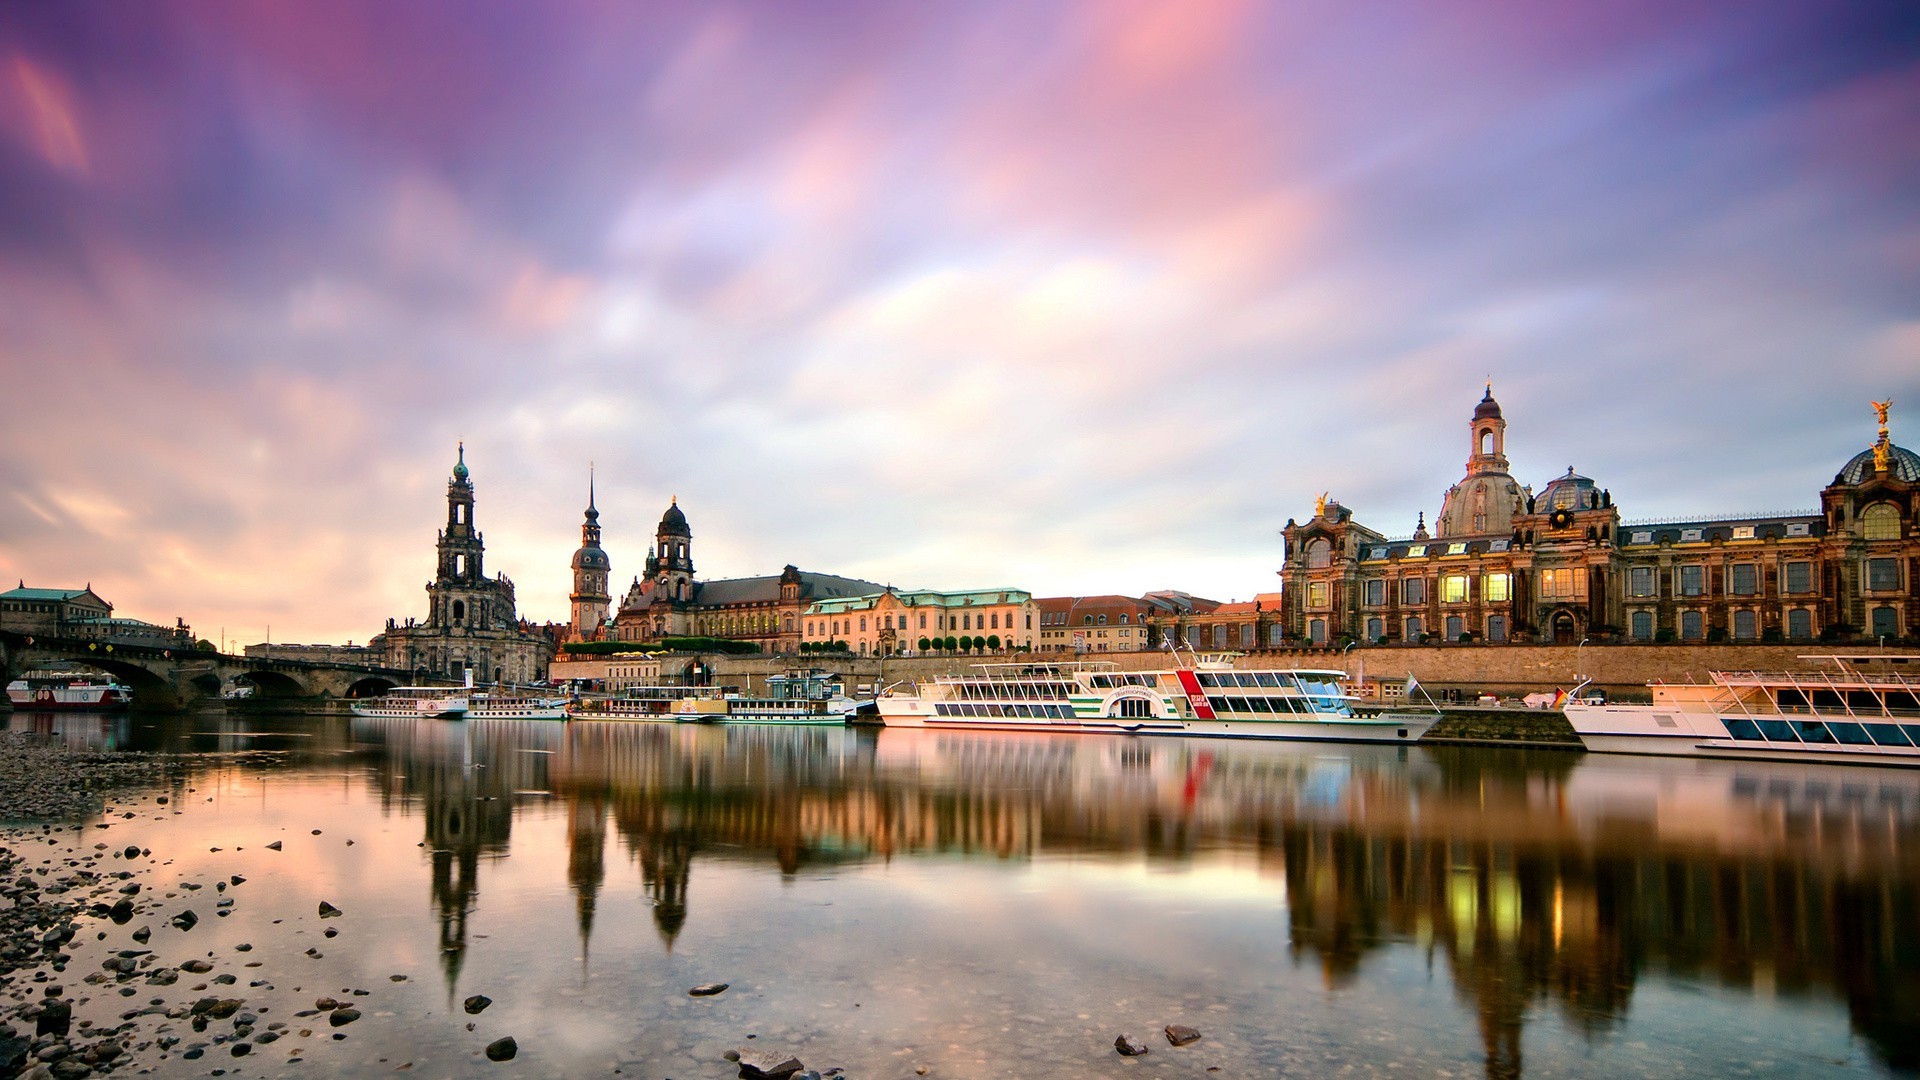 nature, Landscape, Architecture, Building, Clouds, City, River, Dresden, Germany, Old Building, Church, Tower, Water, Boats, Reflection, Stones, Lights, Evening, Sunset, Bridge, Cathedral, Long Exposure, Trees Wallpaper